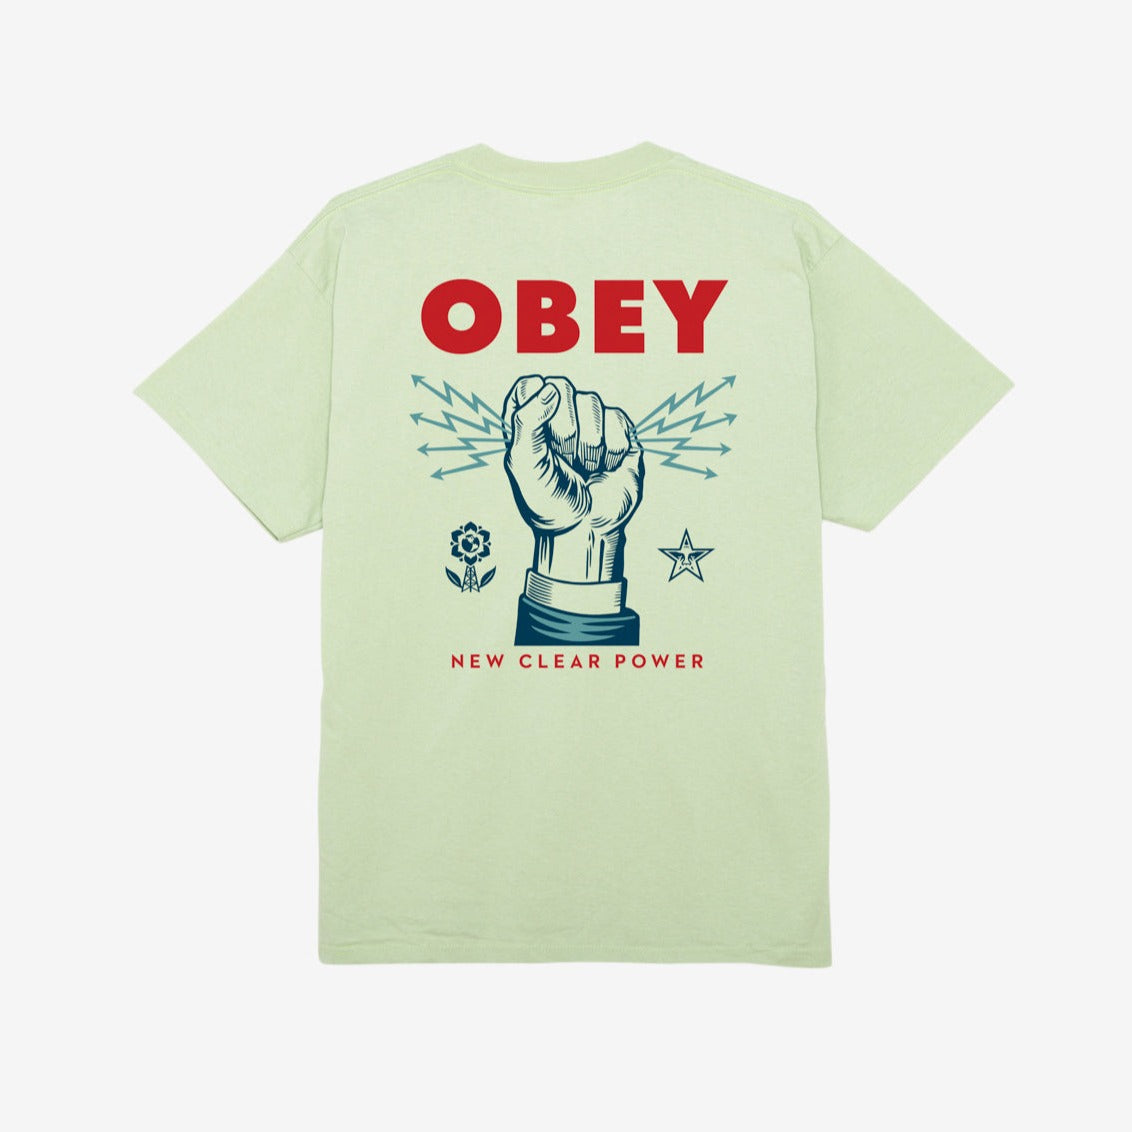 Obey New Clear Power T-Shirt - Cucumber